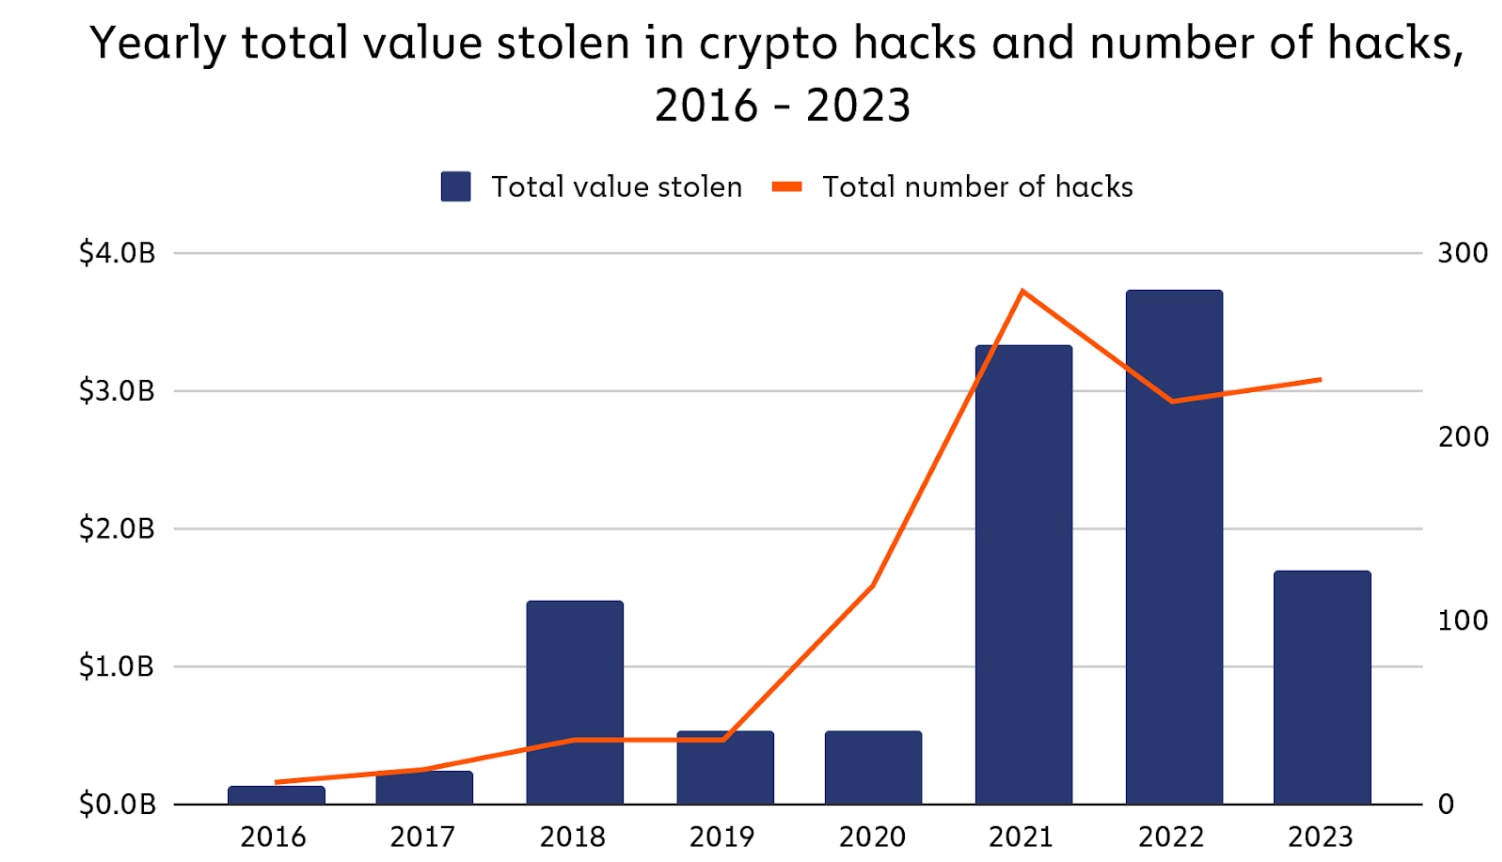 Damages from hacks decrease significantly in 2023